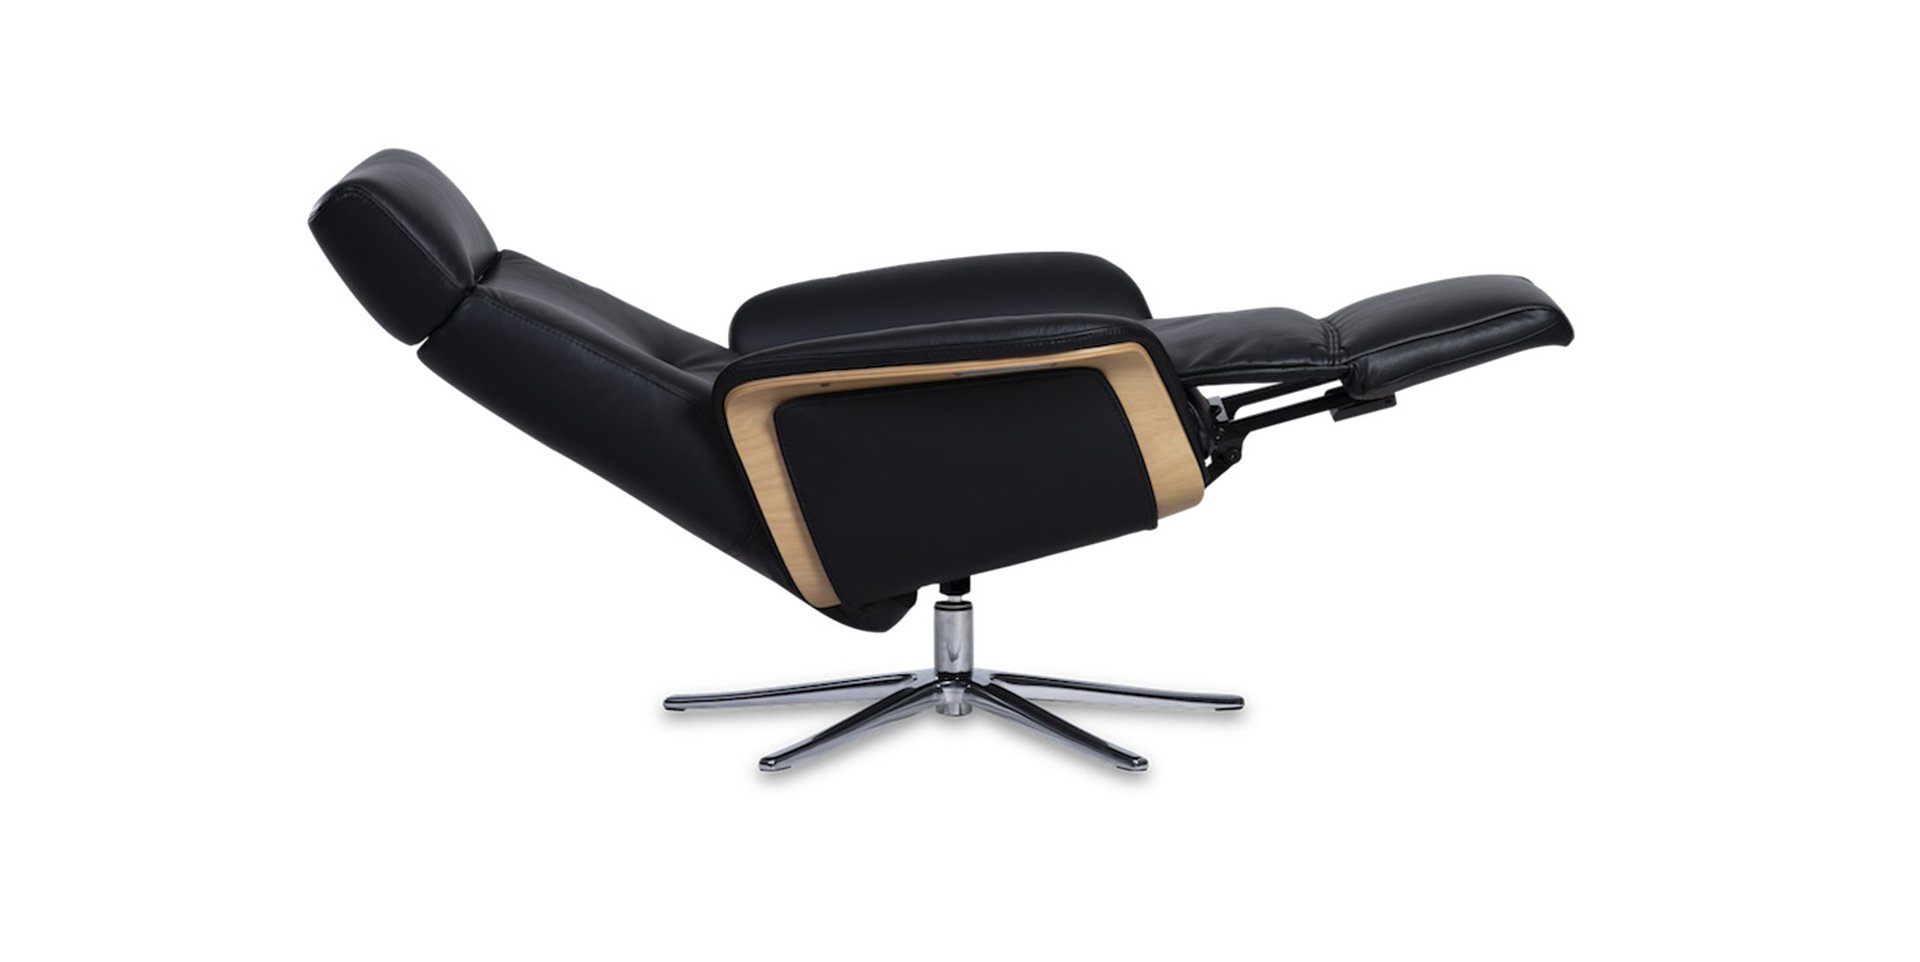 Slider Fauteuil relaxation SPACE 5000 POWER (image 2)